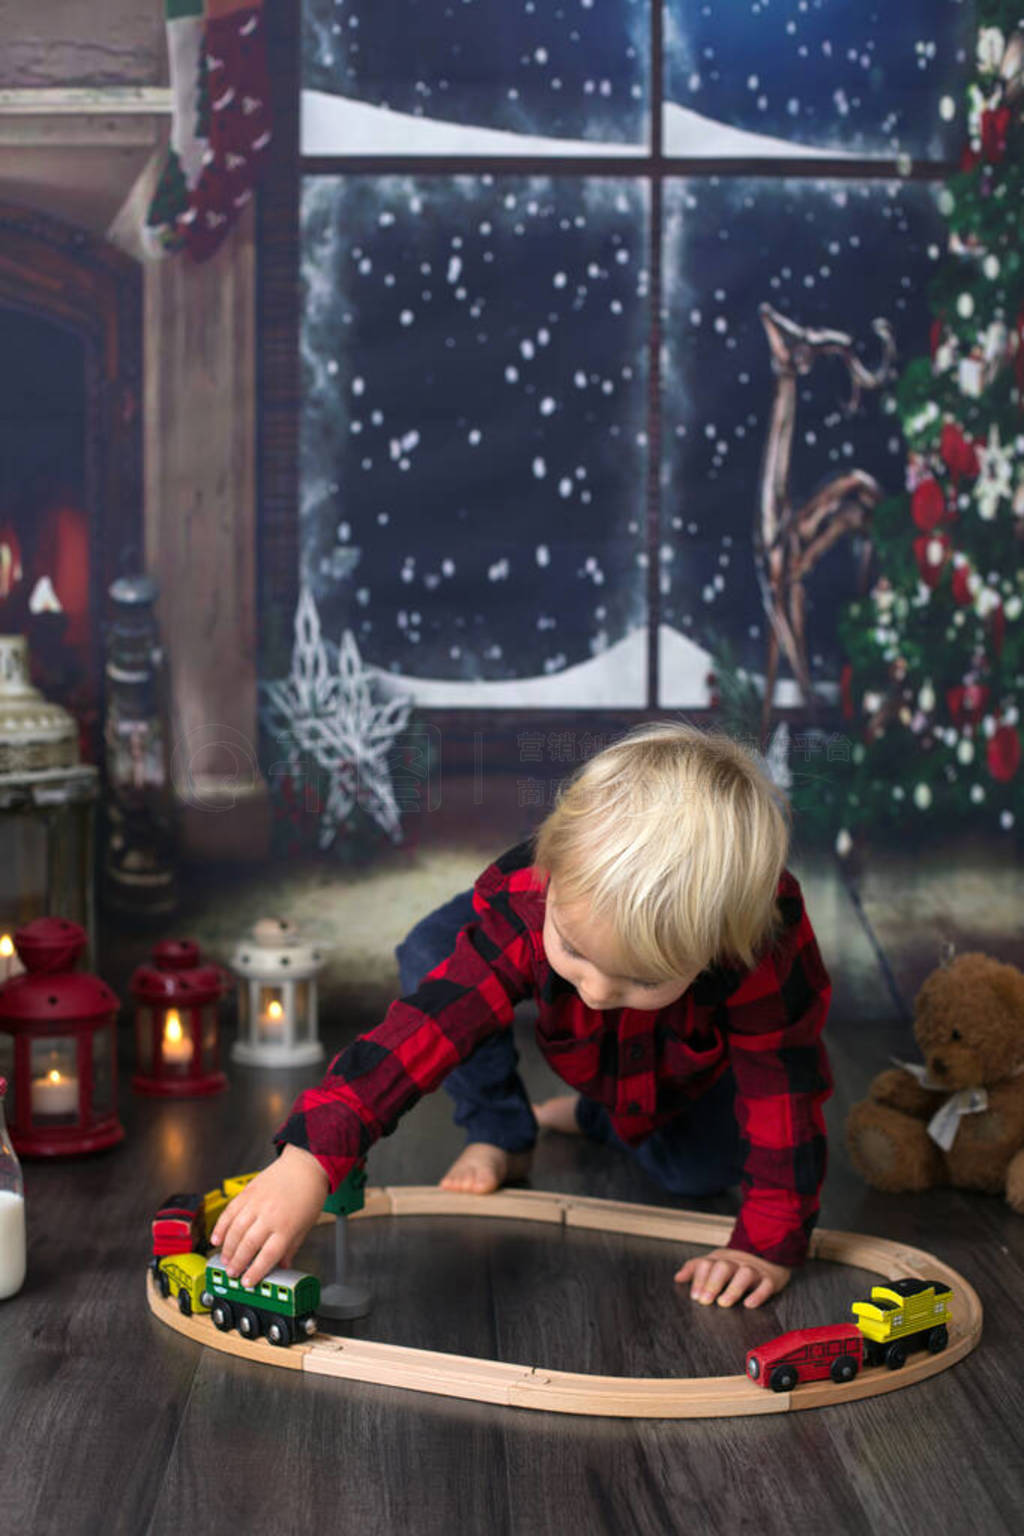 Sweet toddler boy,playing with wooden train at home at night on